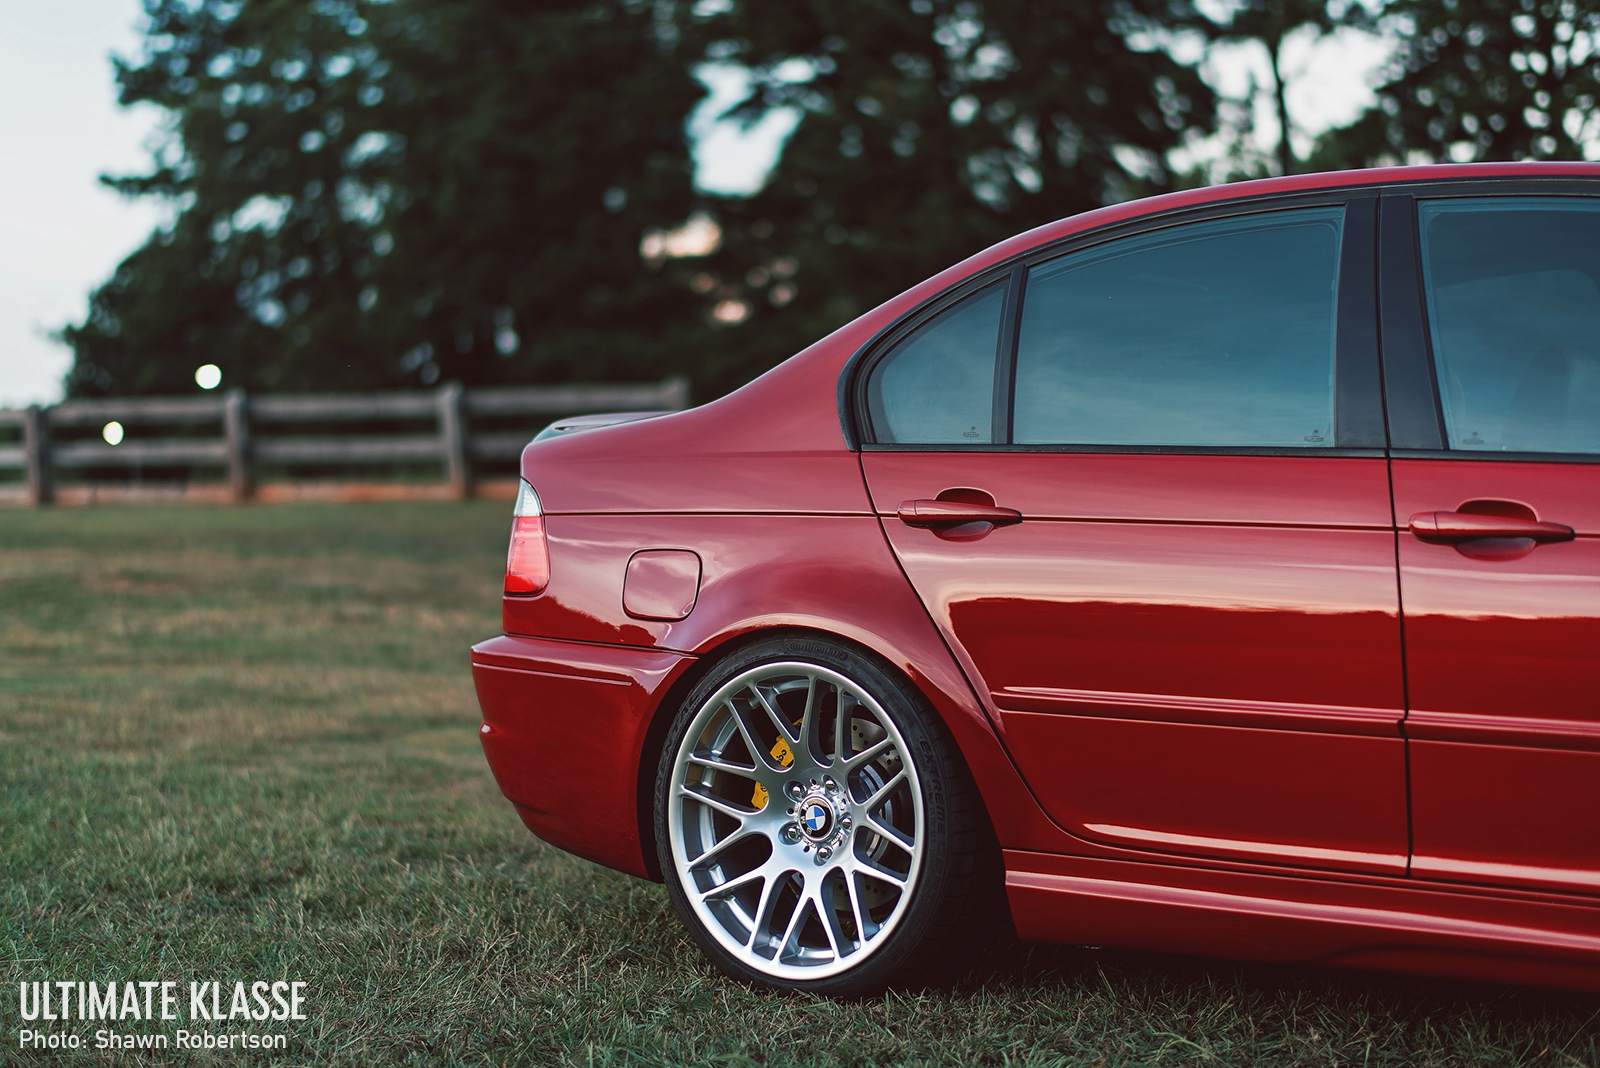 This E46 M3 Sedan Conversion Reminds Us Of The Other M3 BMW